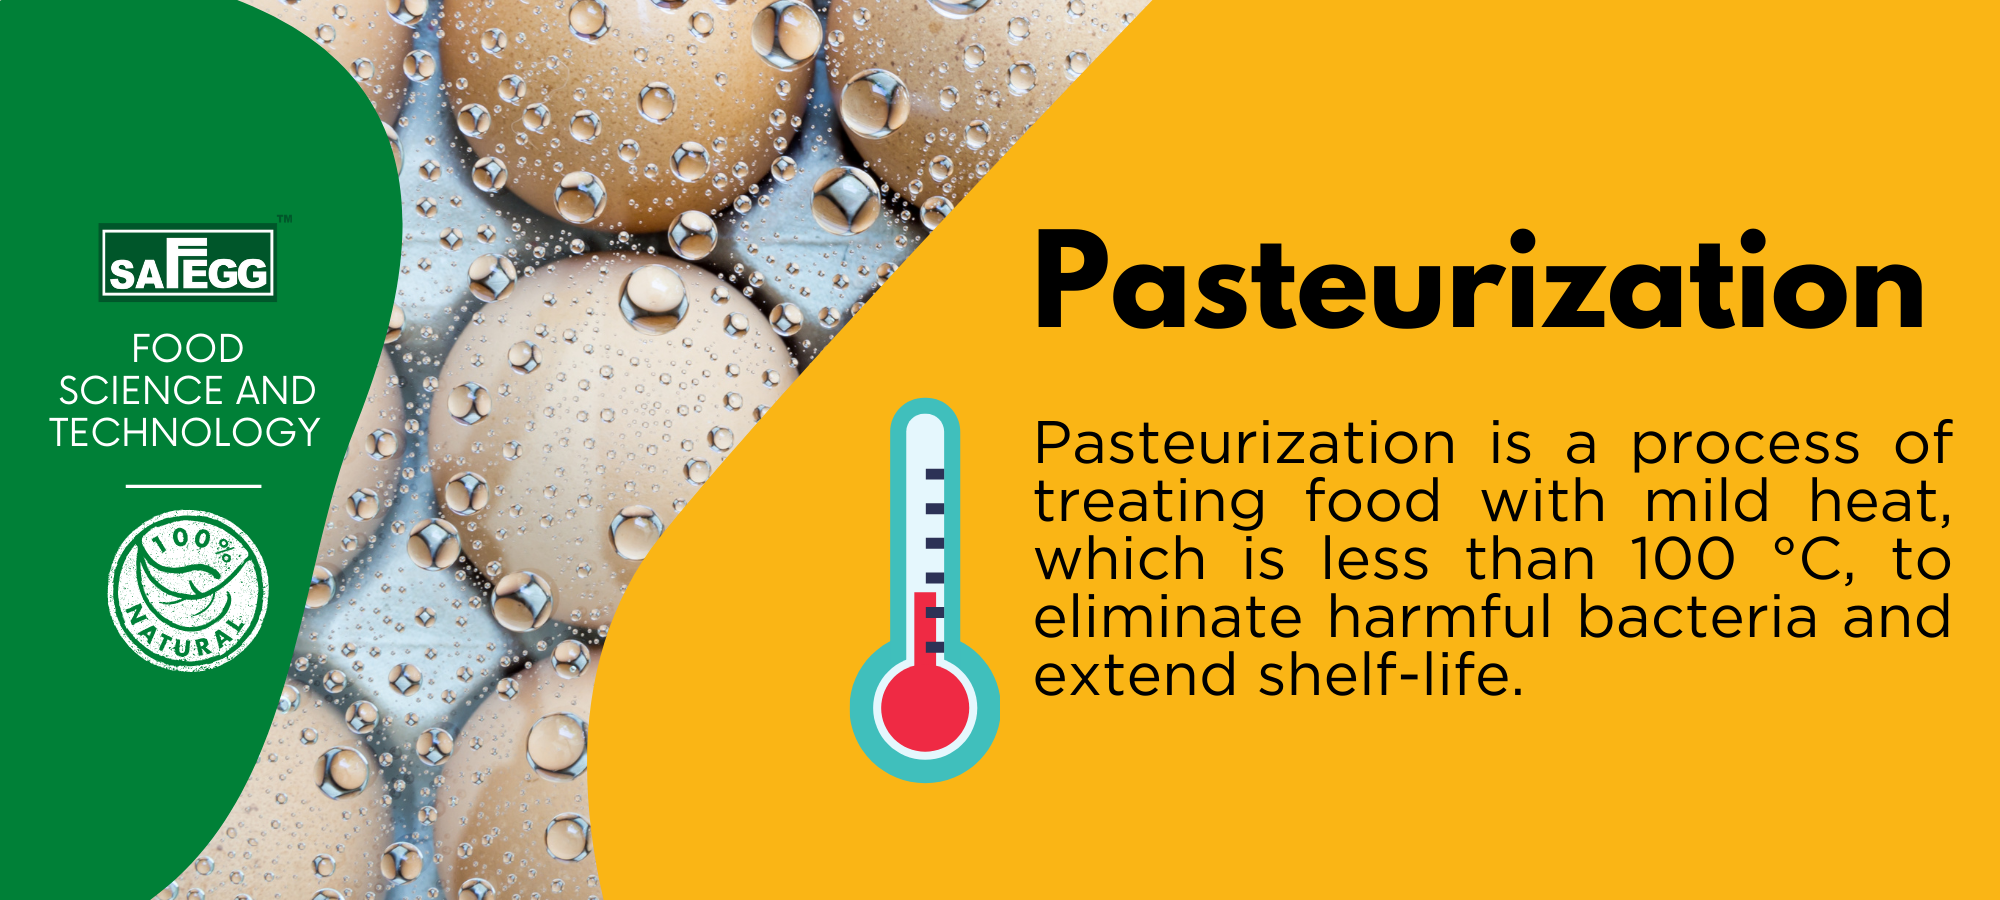 What is pasteurization?